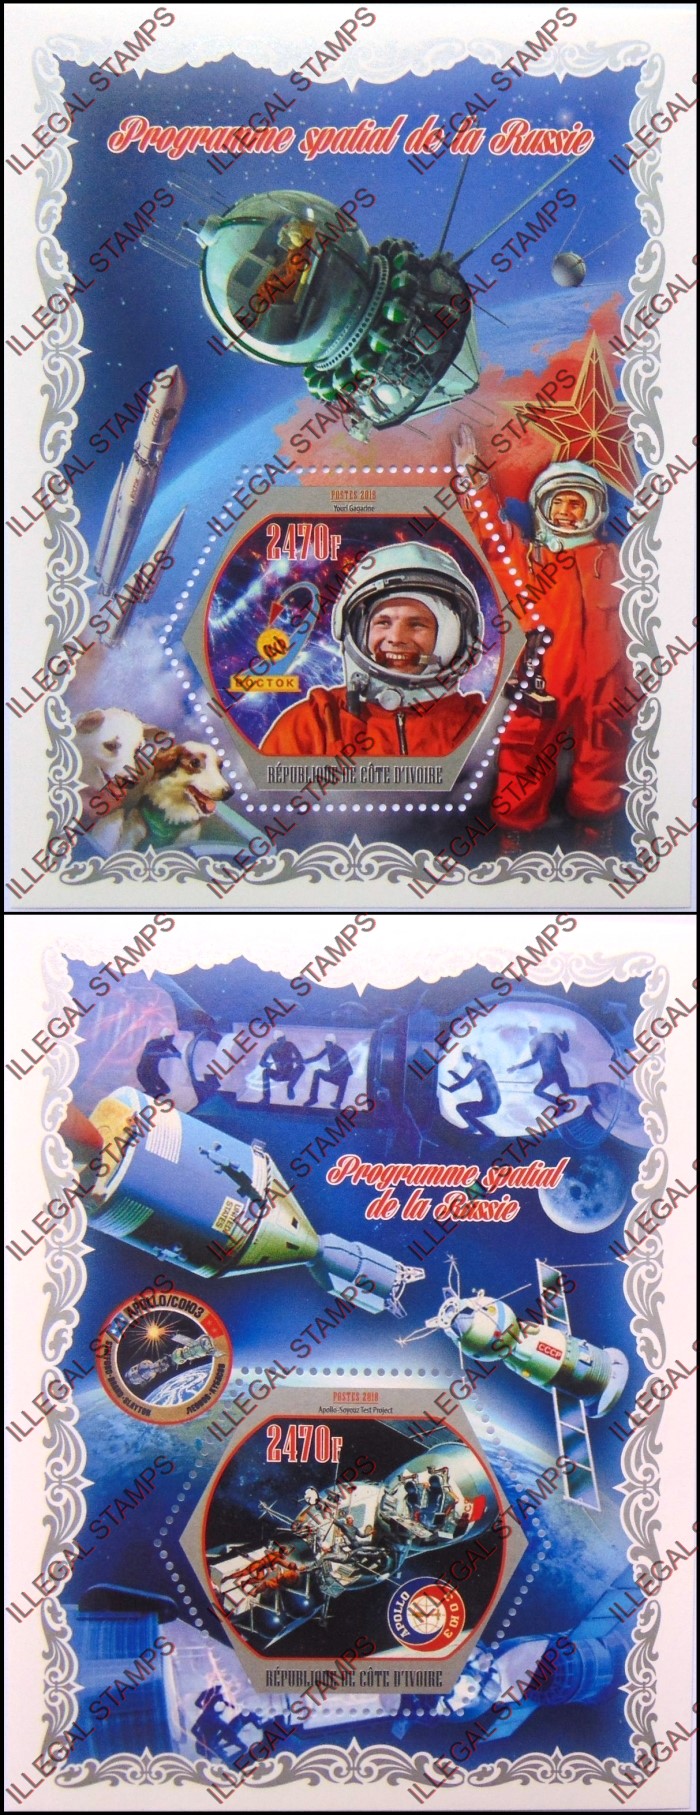 Ivory Coast 2018 Space Russia Illegal Stamp Souvenir Sheets of 1